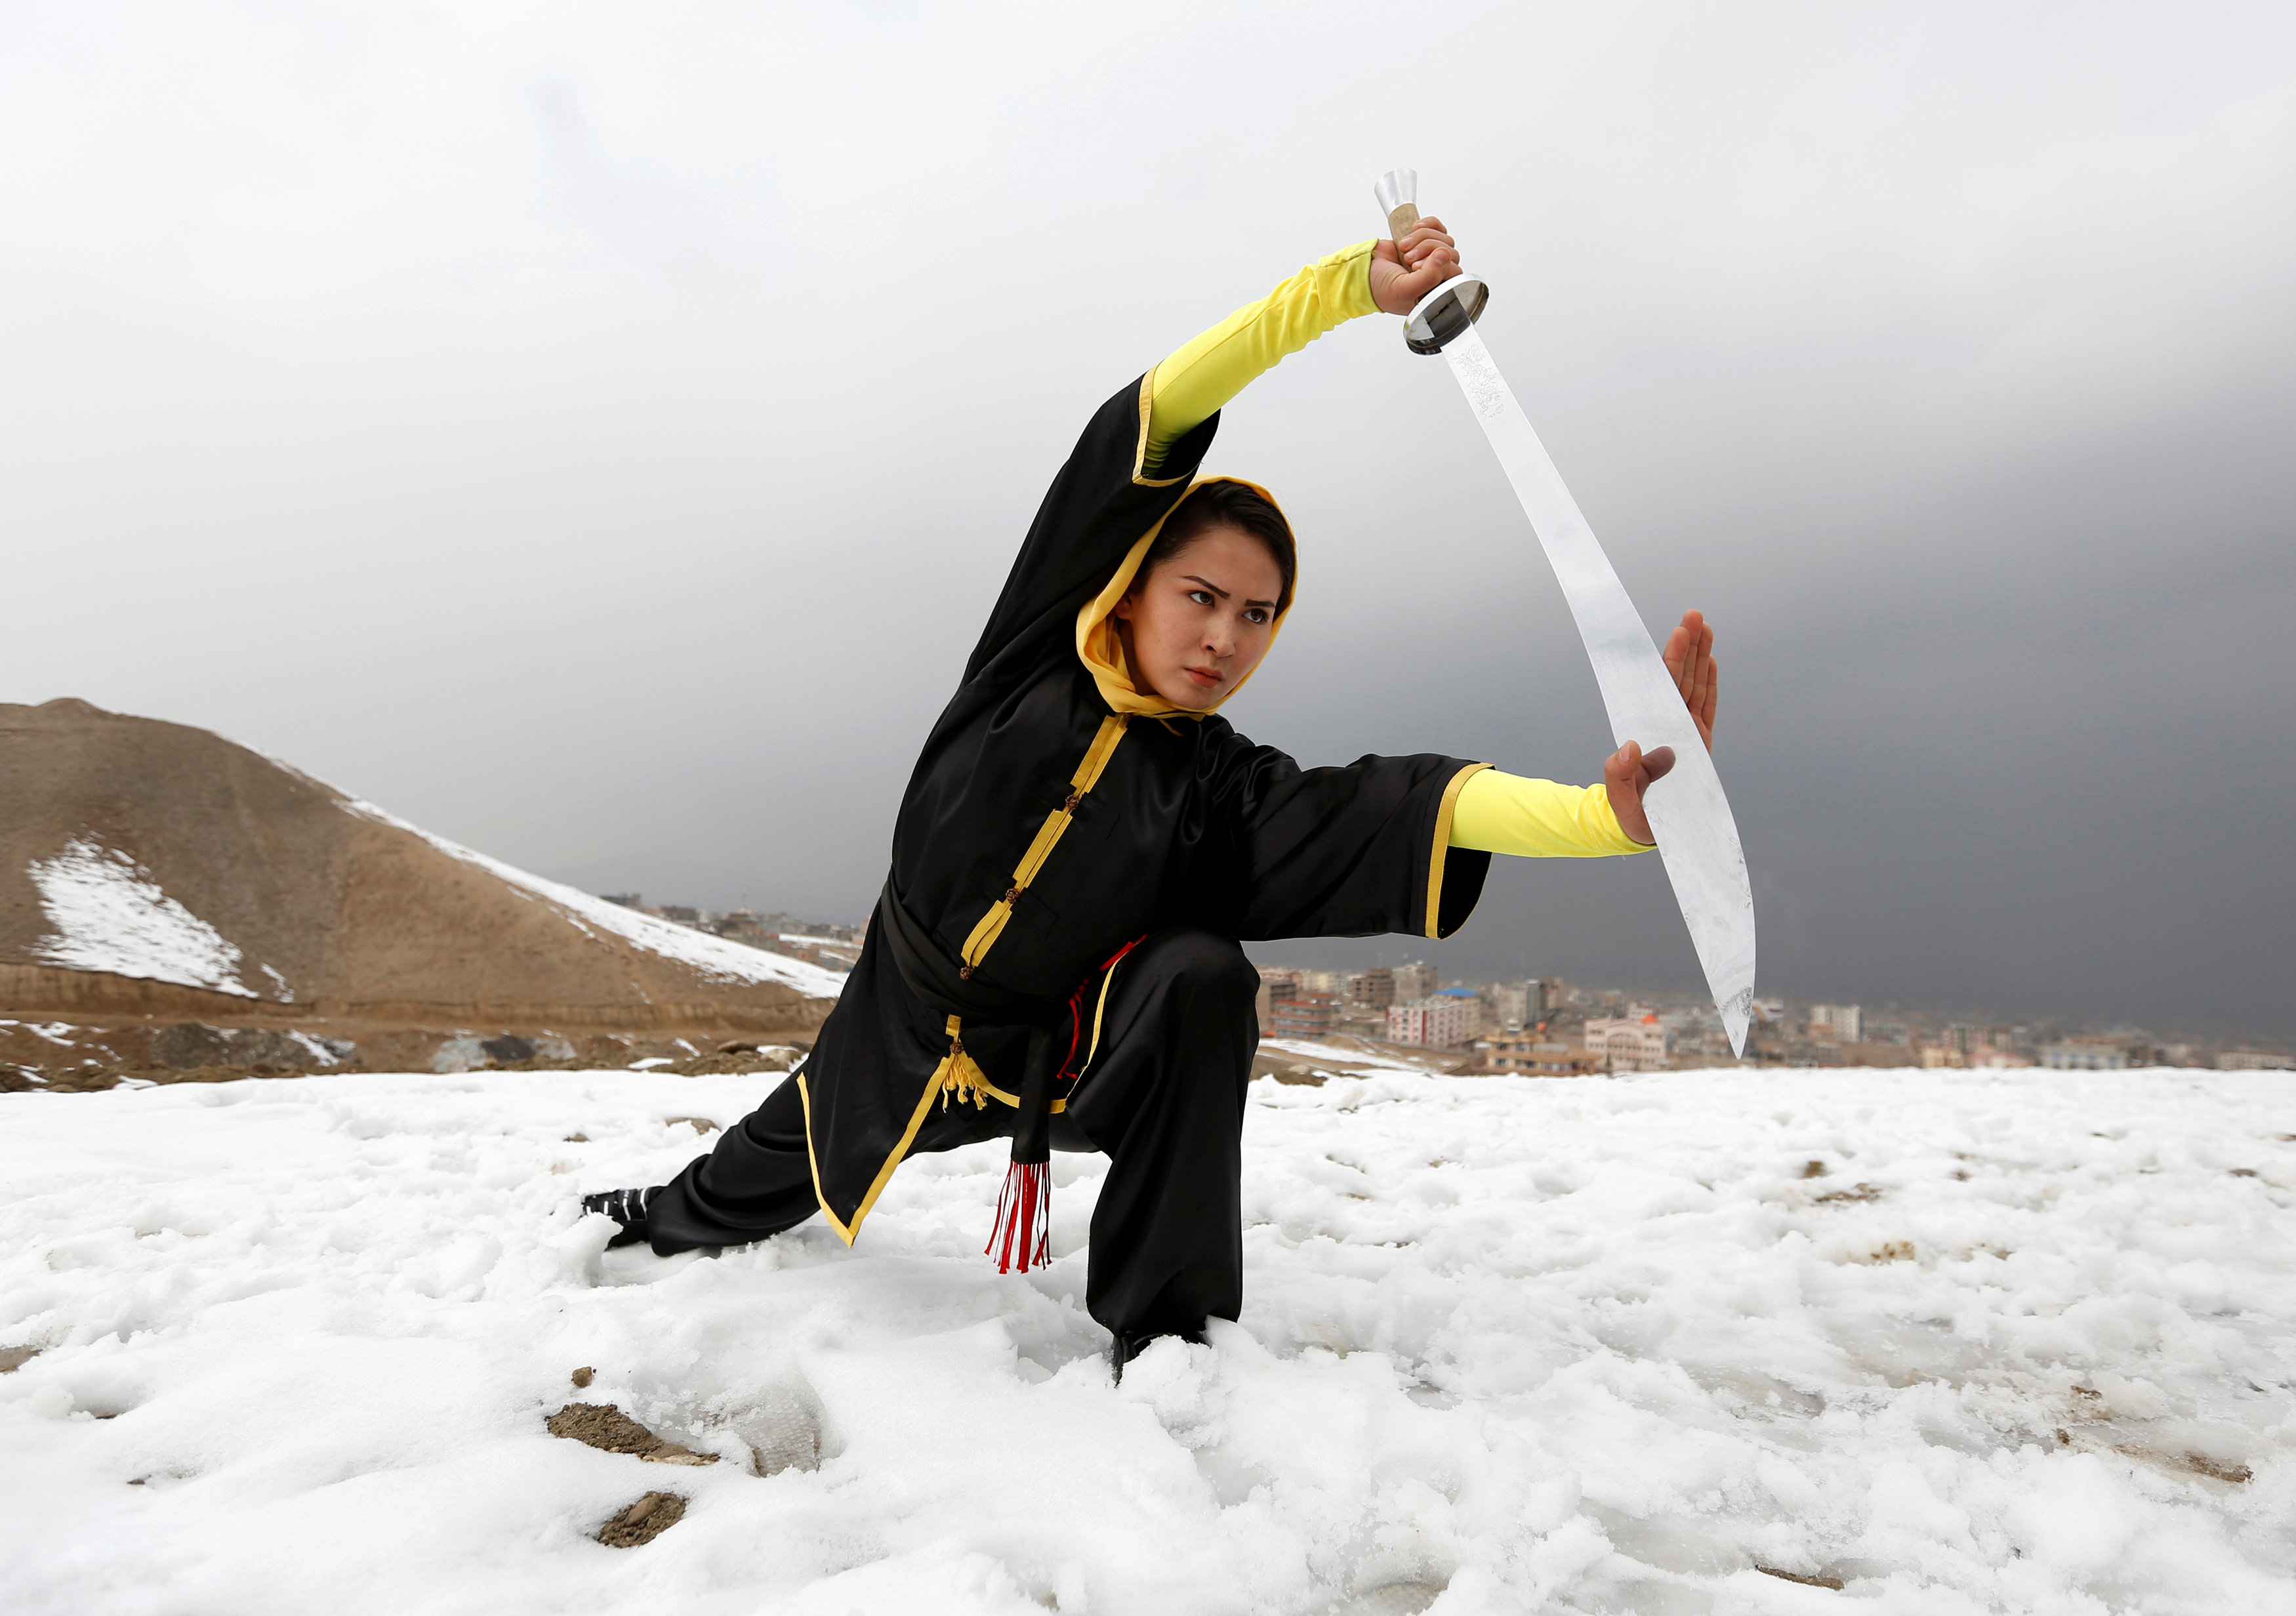 Sima Azimi, 20, a trainer at the Shaolin Wushu club, shows her Wushu skills to other students on a hilltop in Kabul, Afghanistan January 29, 2017. REUTERS/Mohammad Ismail